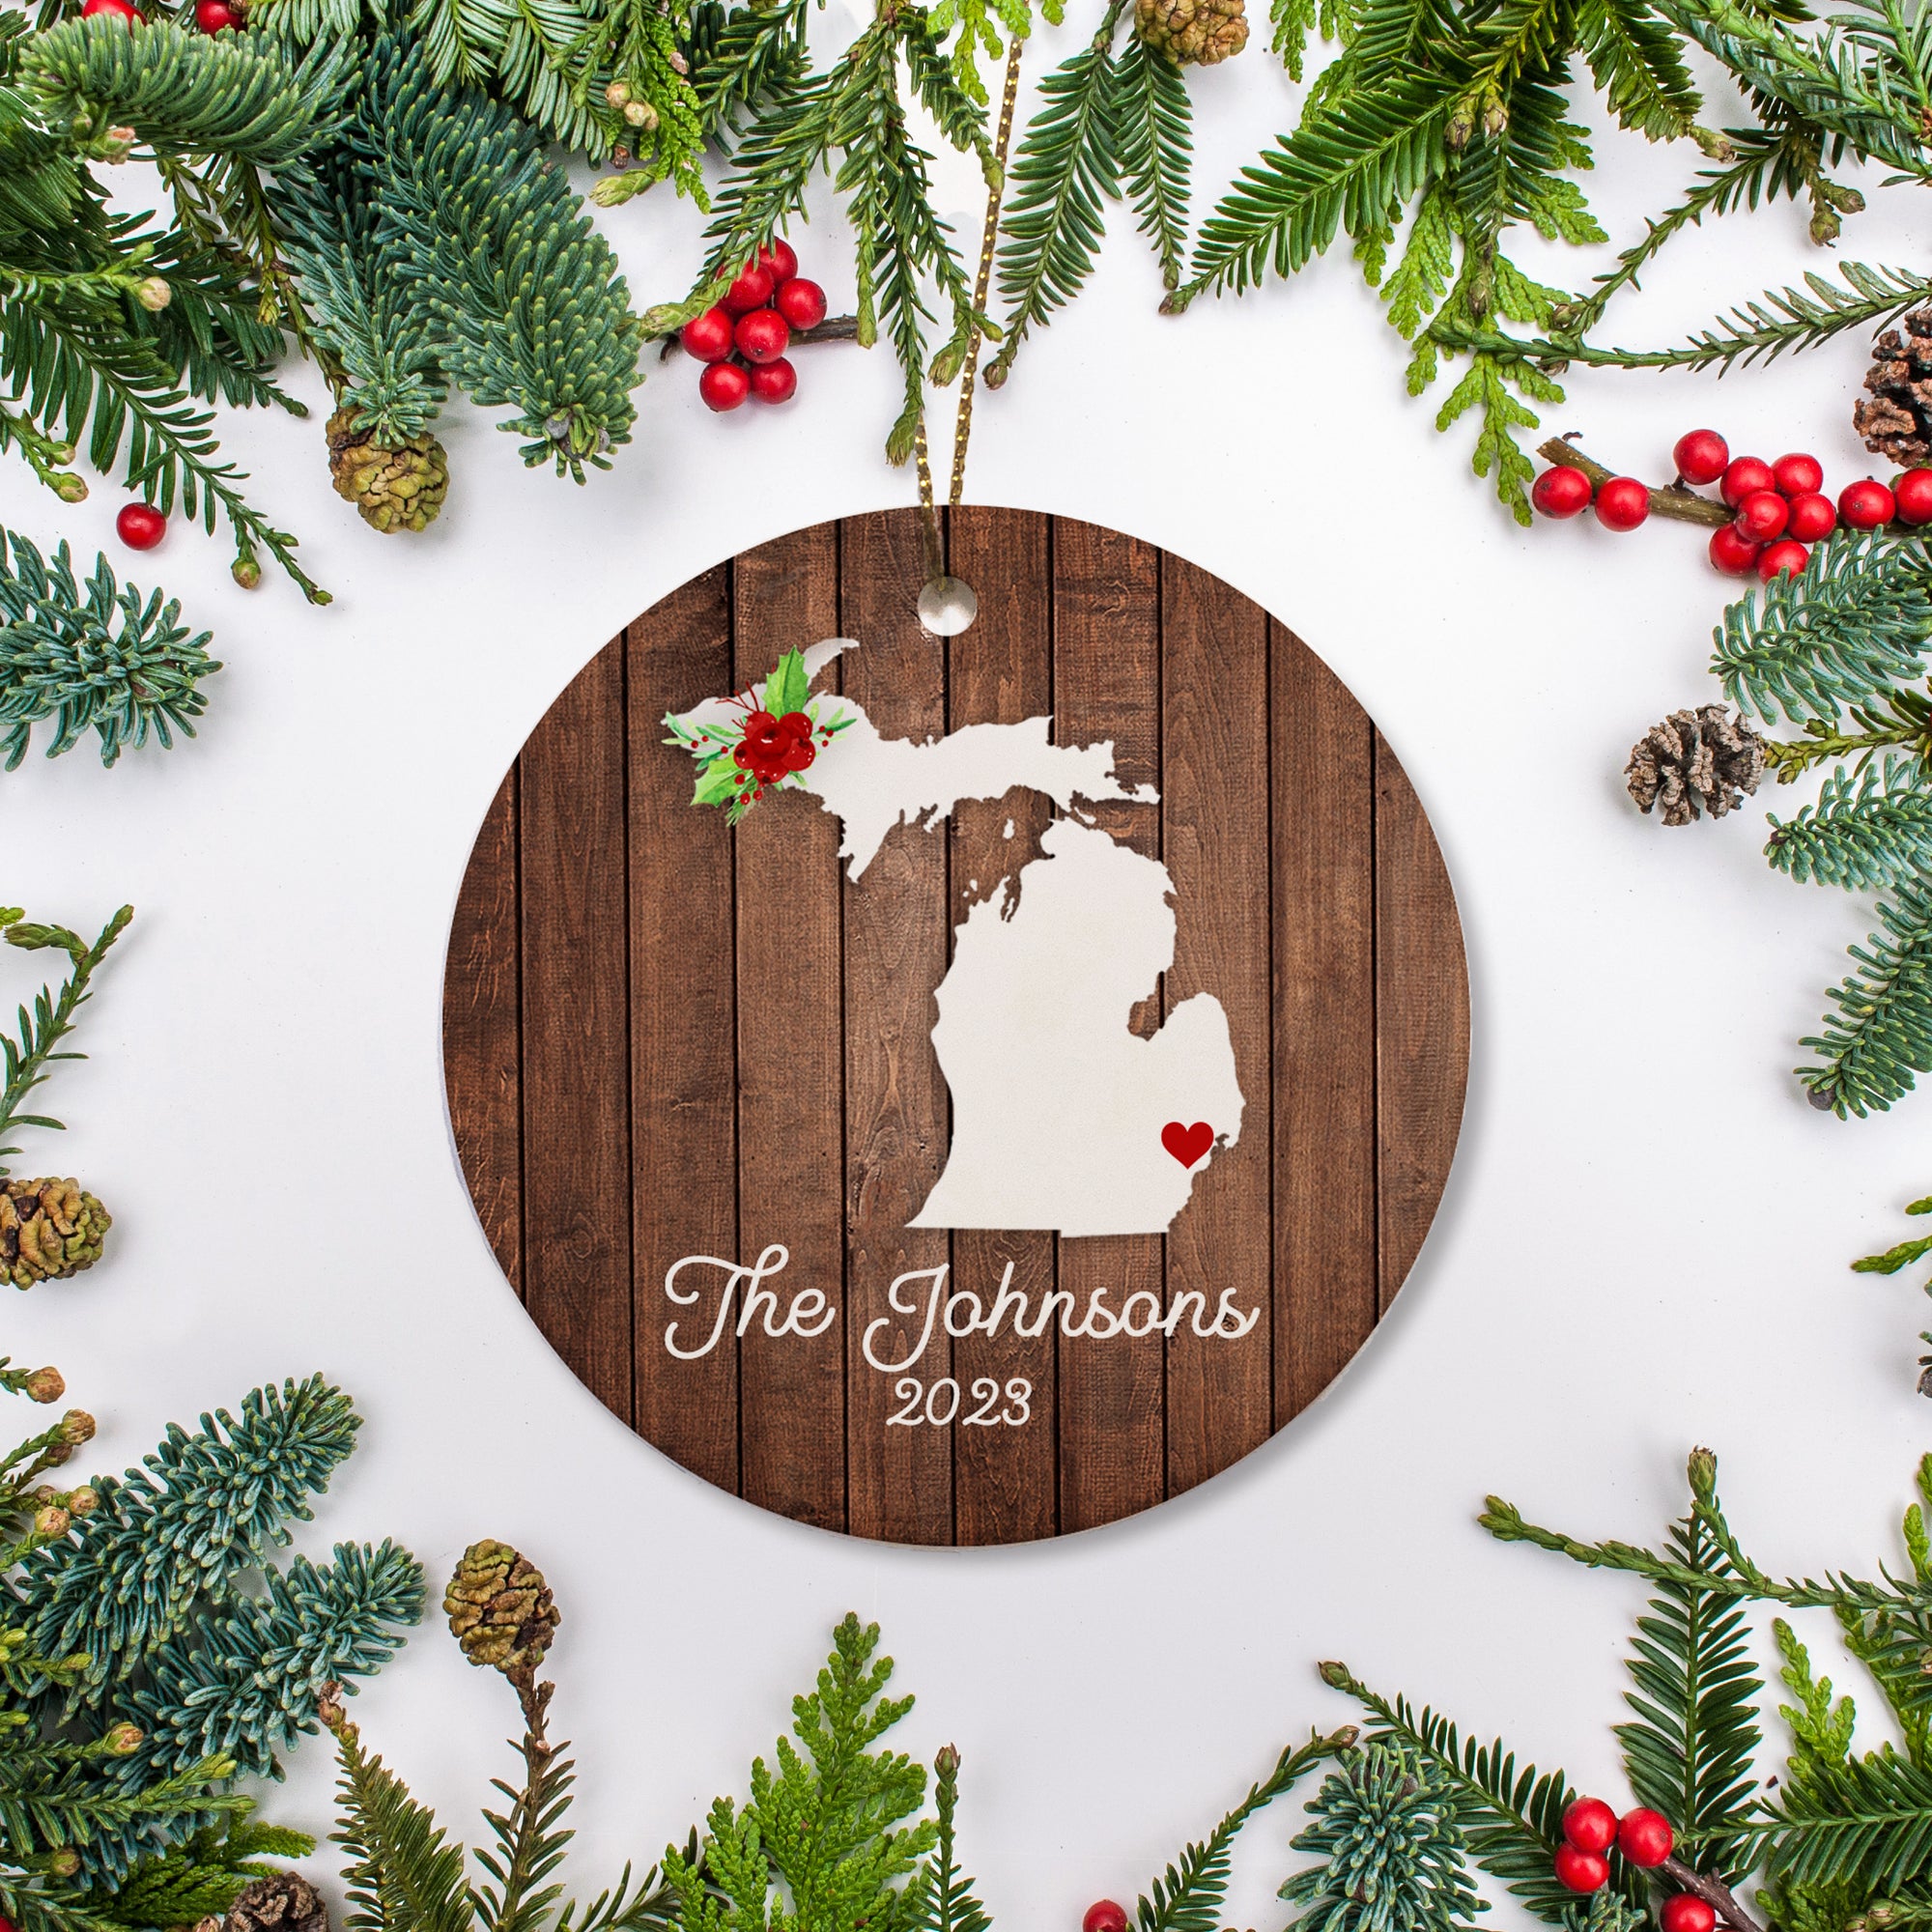 Michigan state christmas ornament. Personalized with your name, city, and year. Ceramic keepsake ornament with a gold hanging string. Great for a college student, new home owners, just moved, or vacation memory